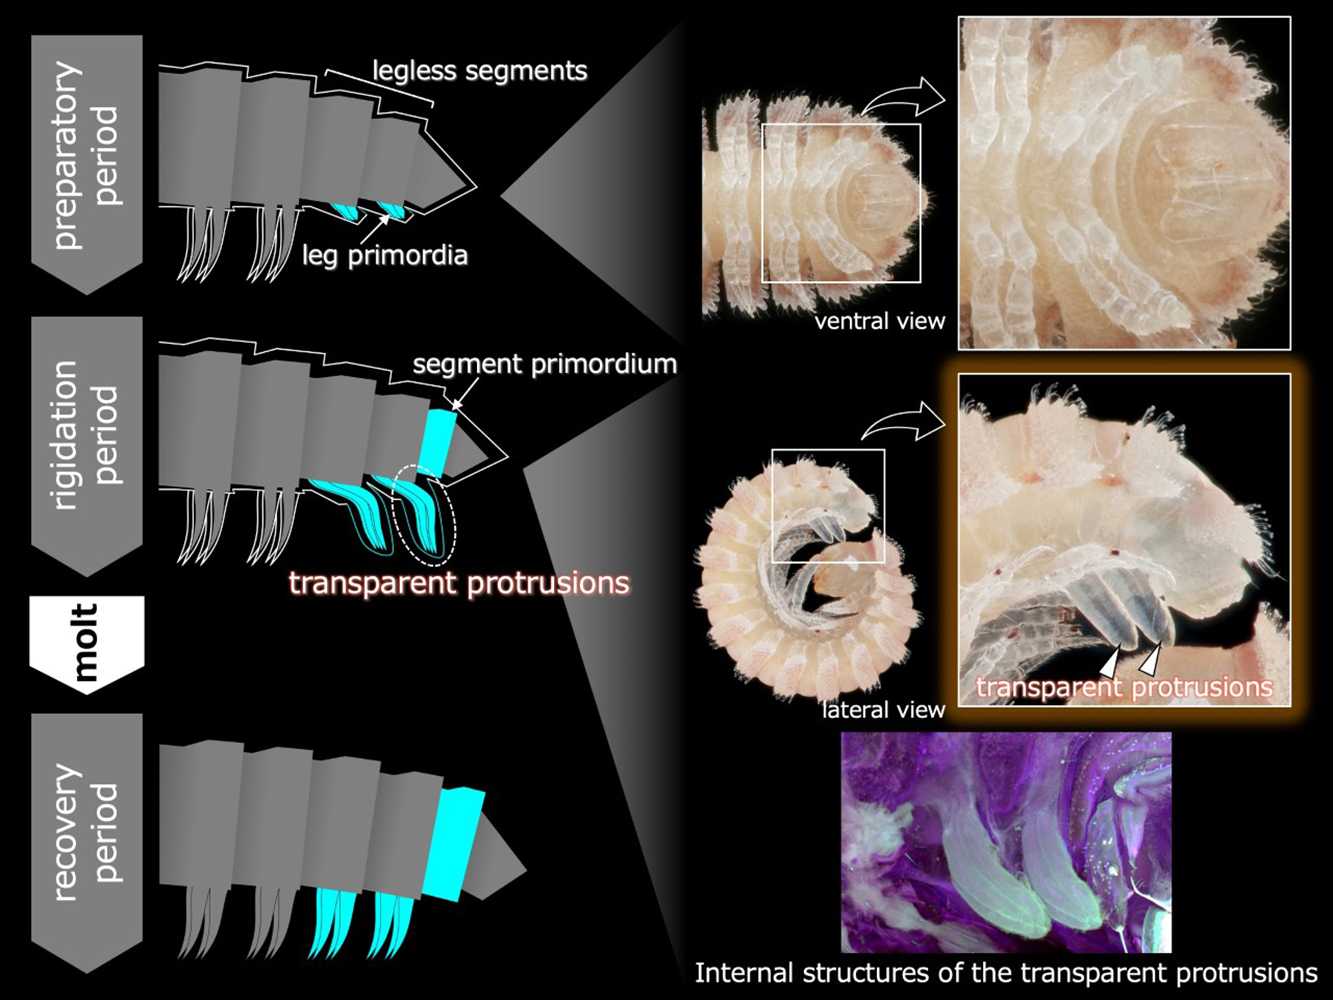 A combined illustration and microscopic images, showing the internal and external view of new leg protrusions on a millipede.